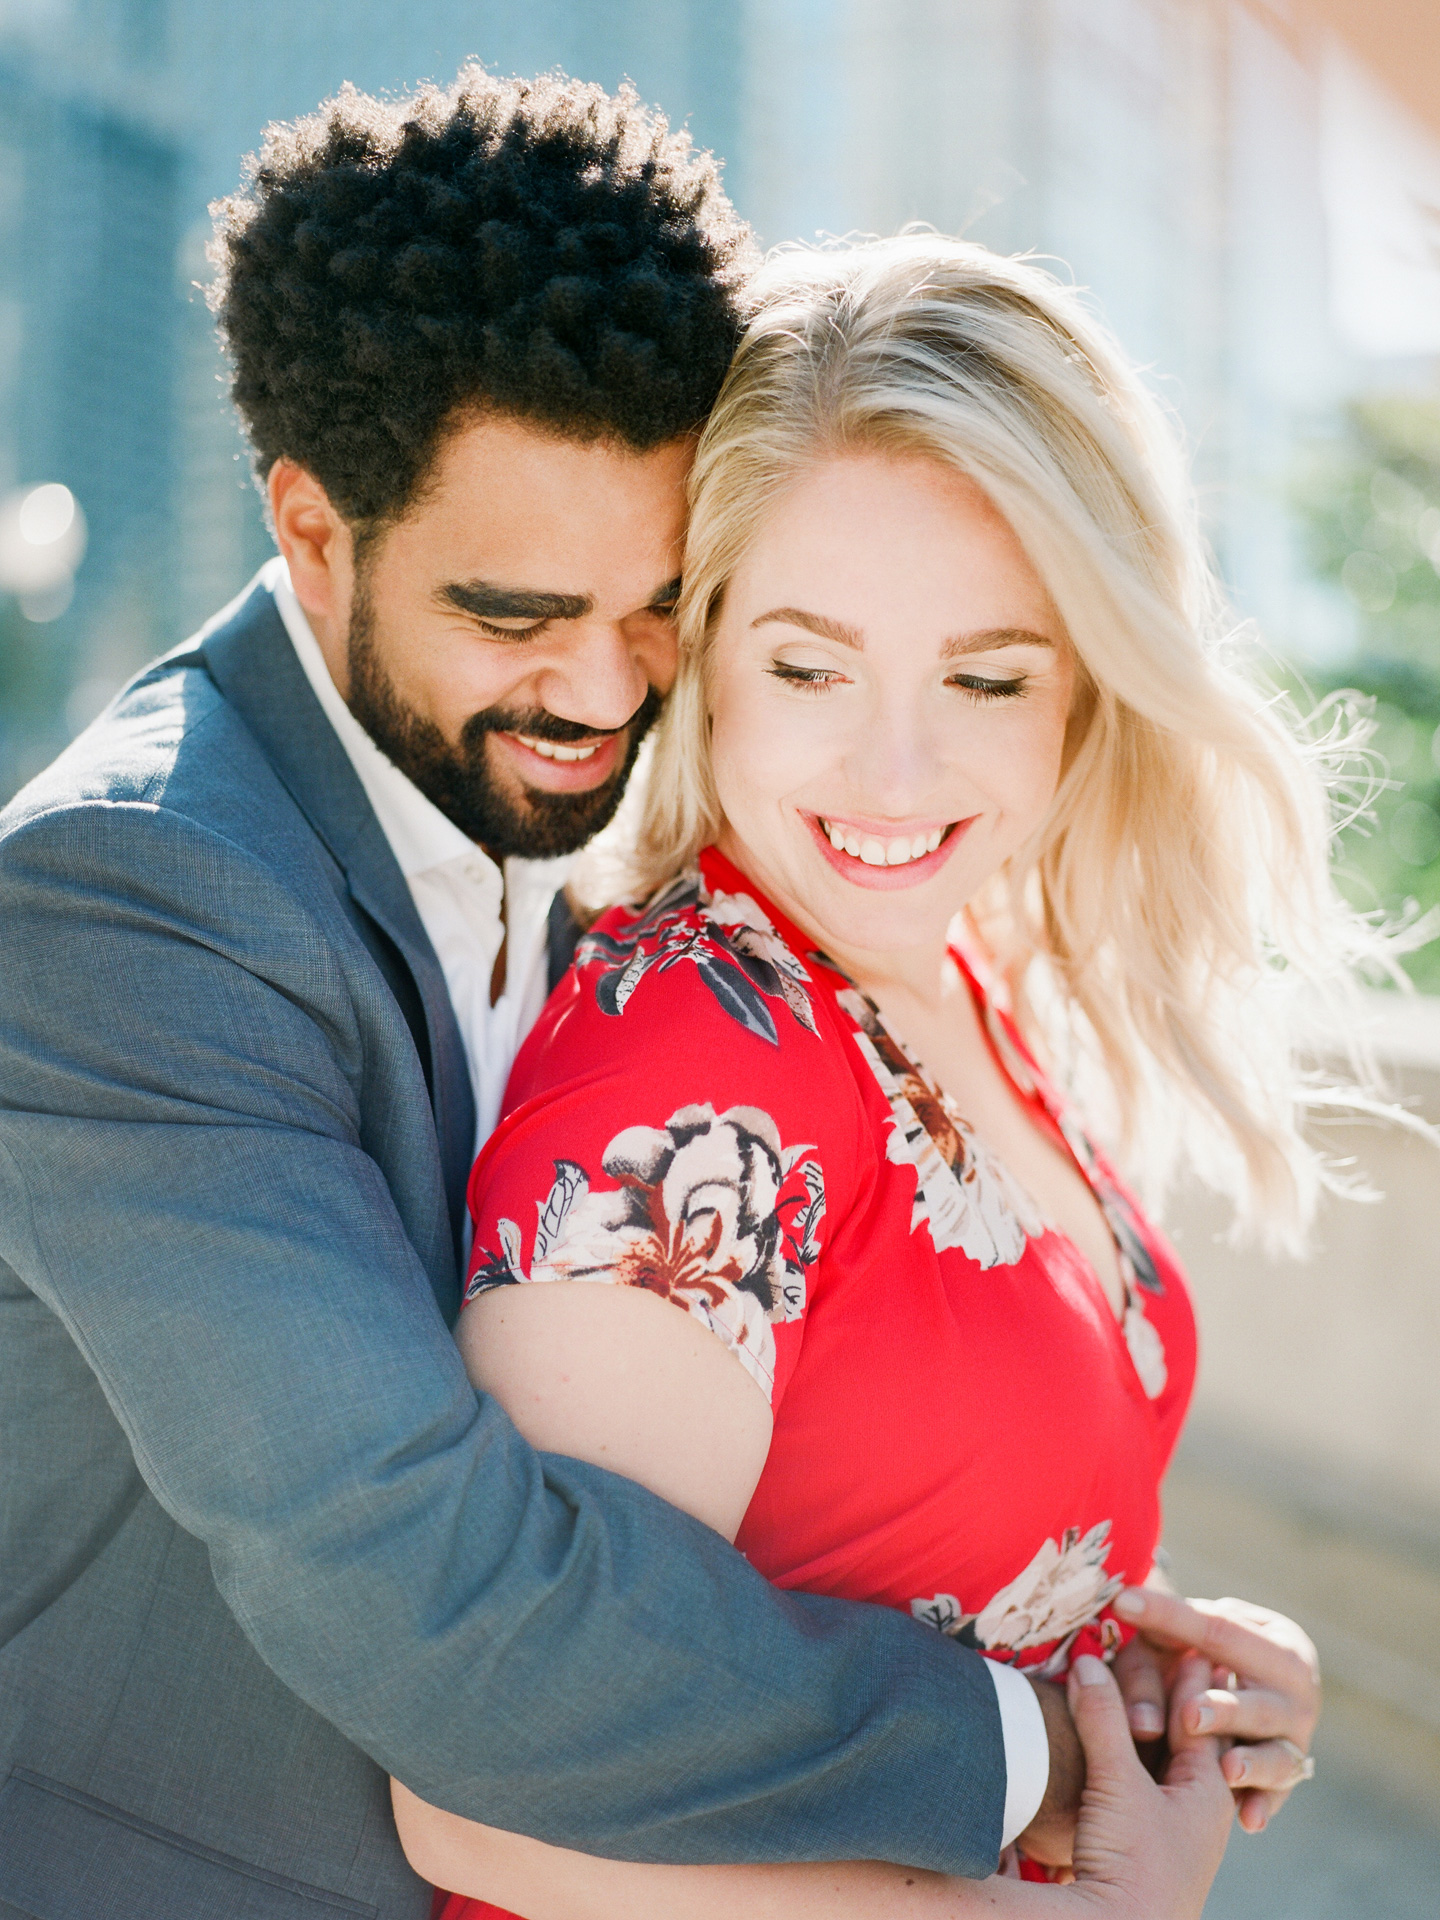 engagement session in chicago by love tree studios